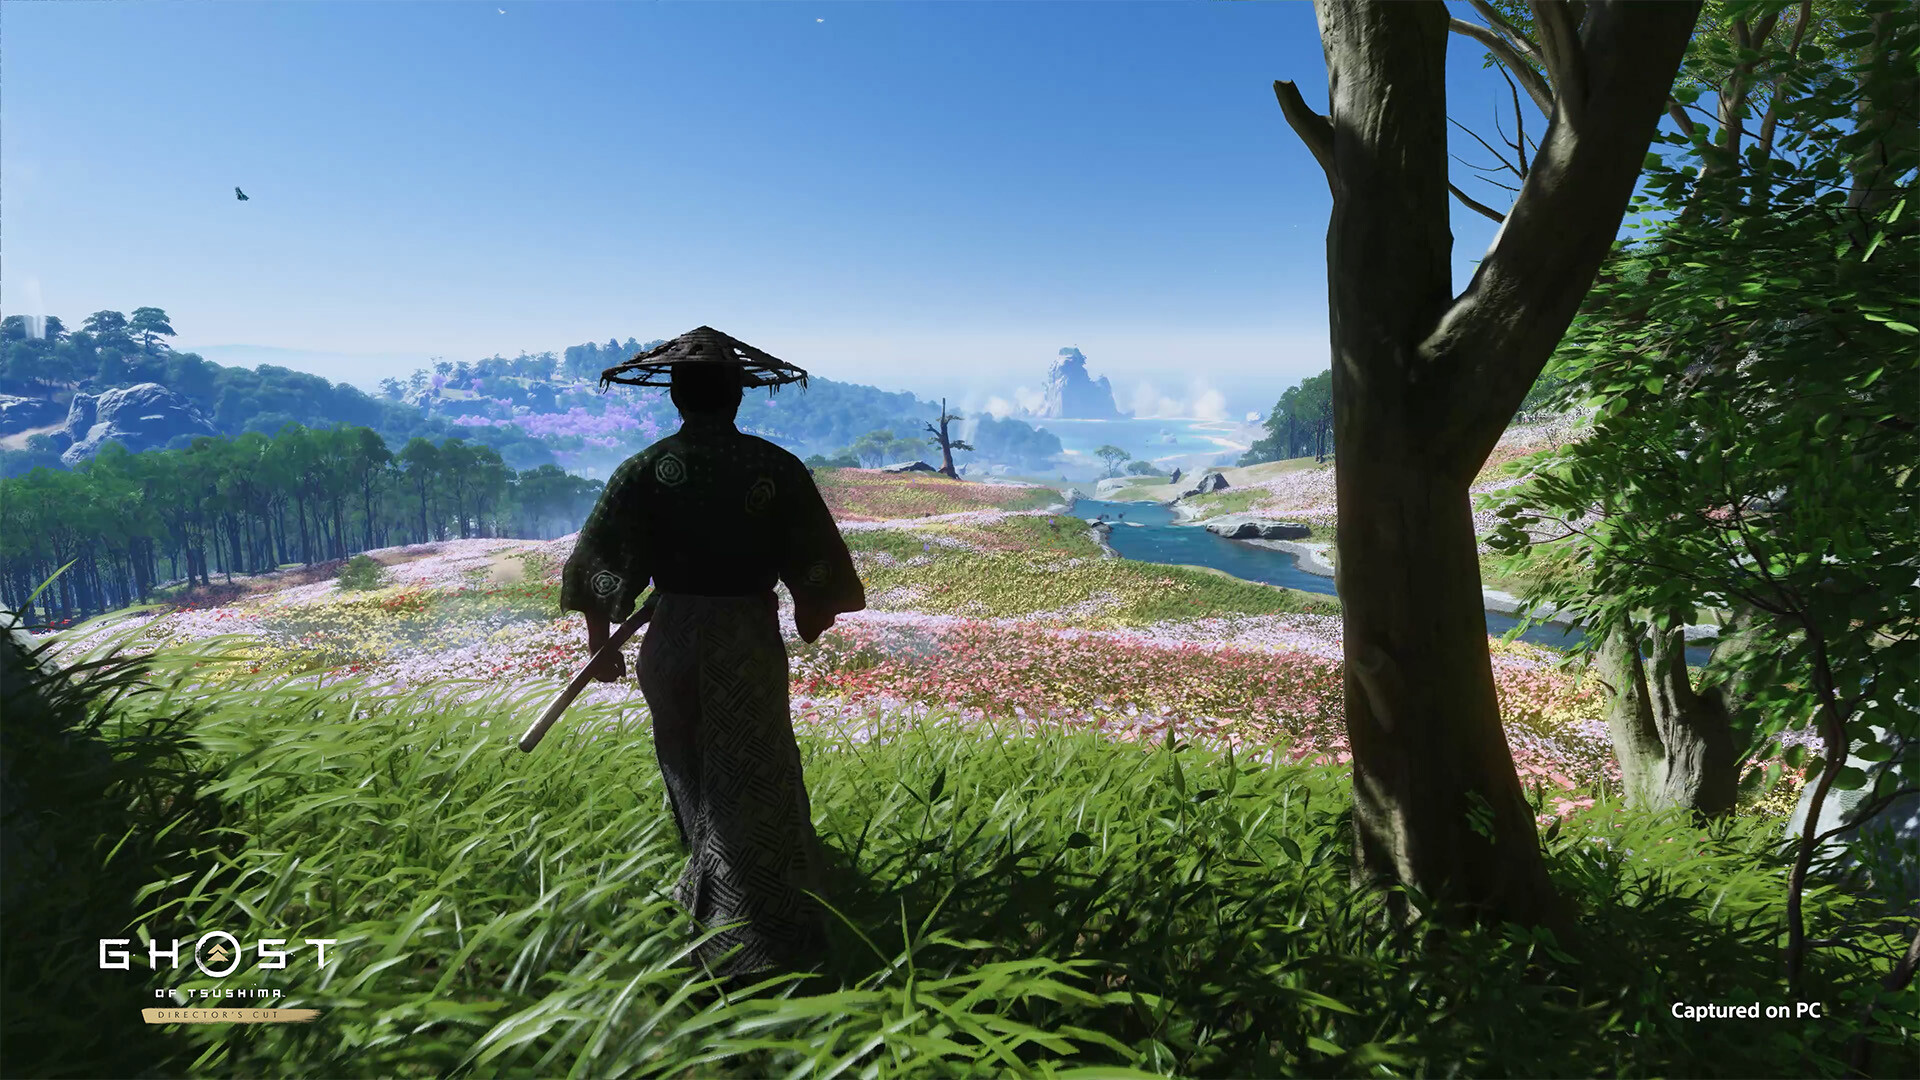 Ghost Of Tsushima will support key technologies on PC